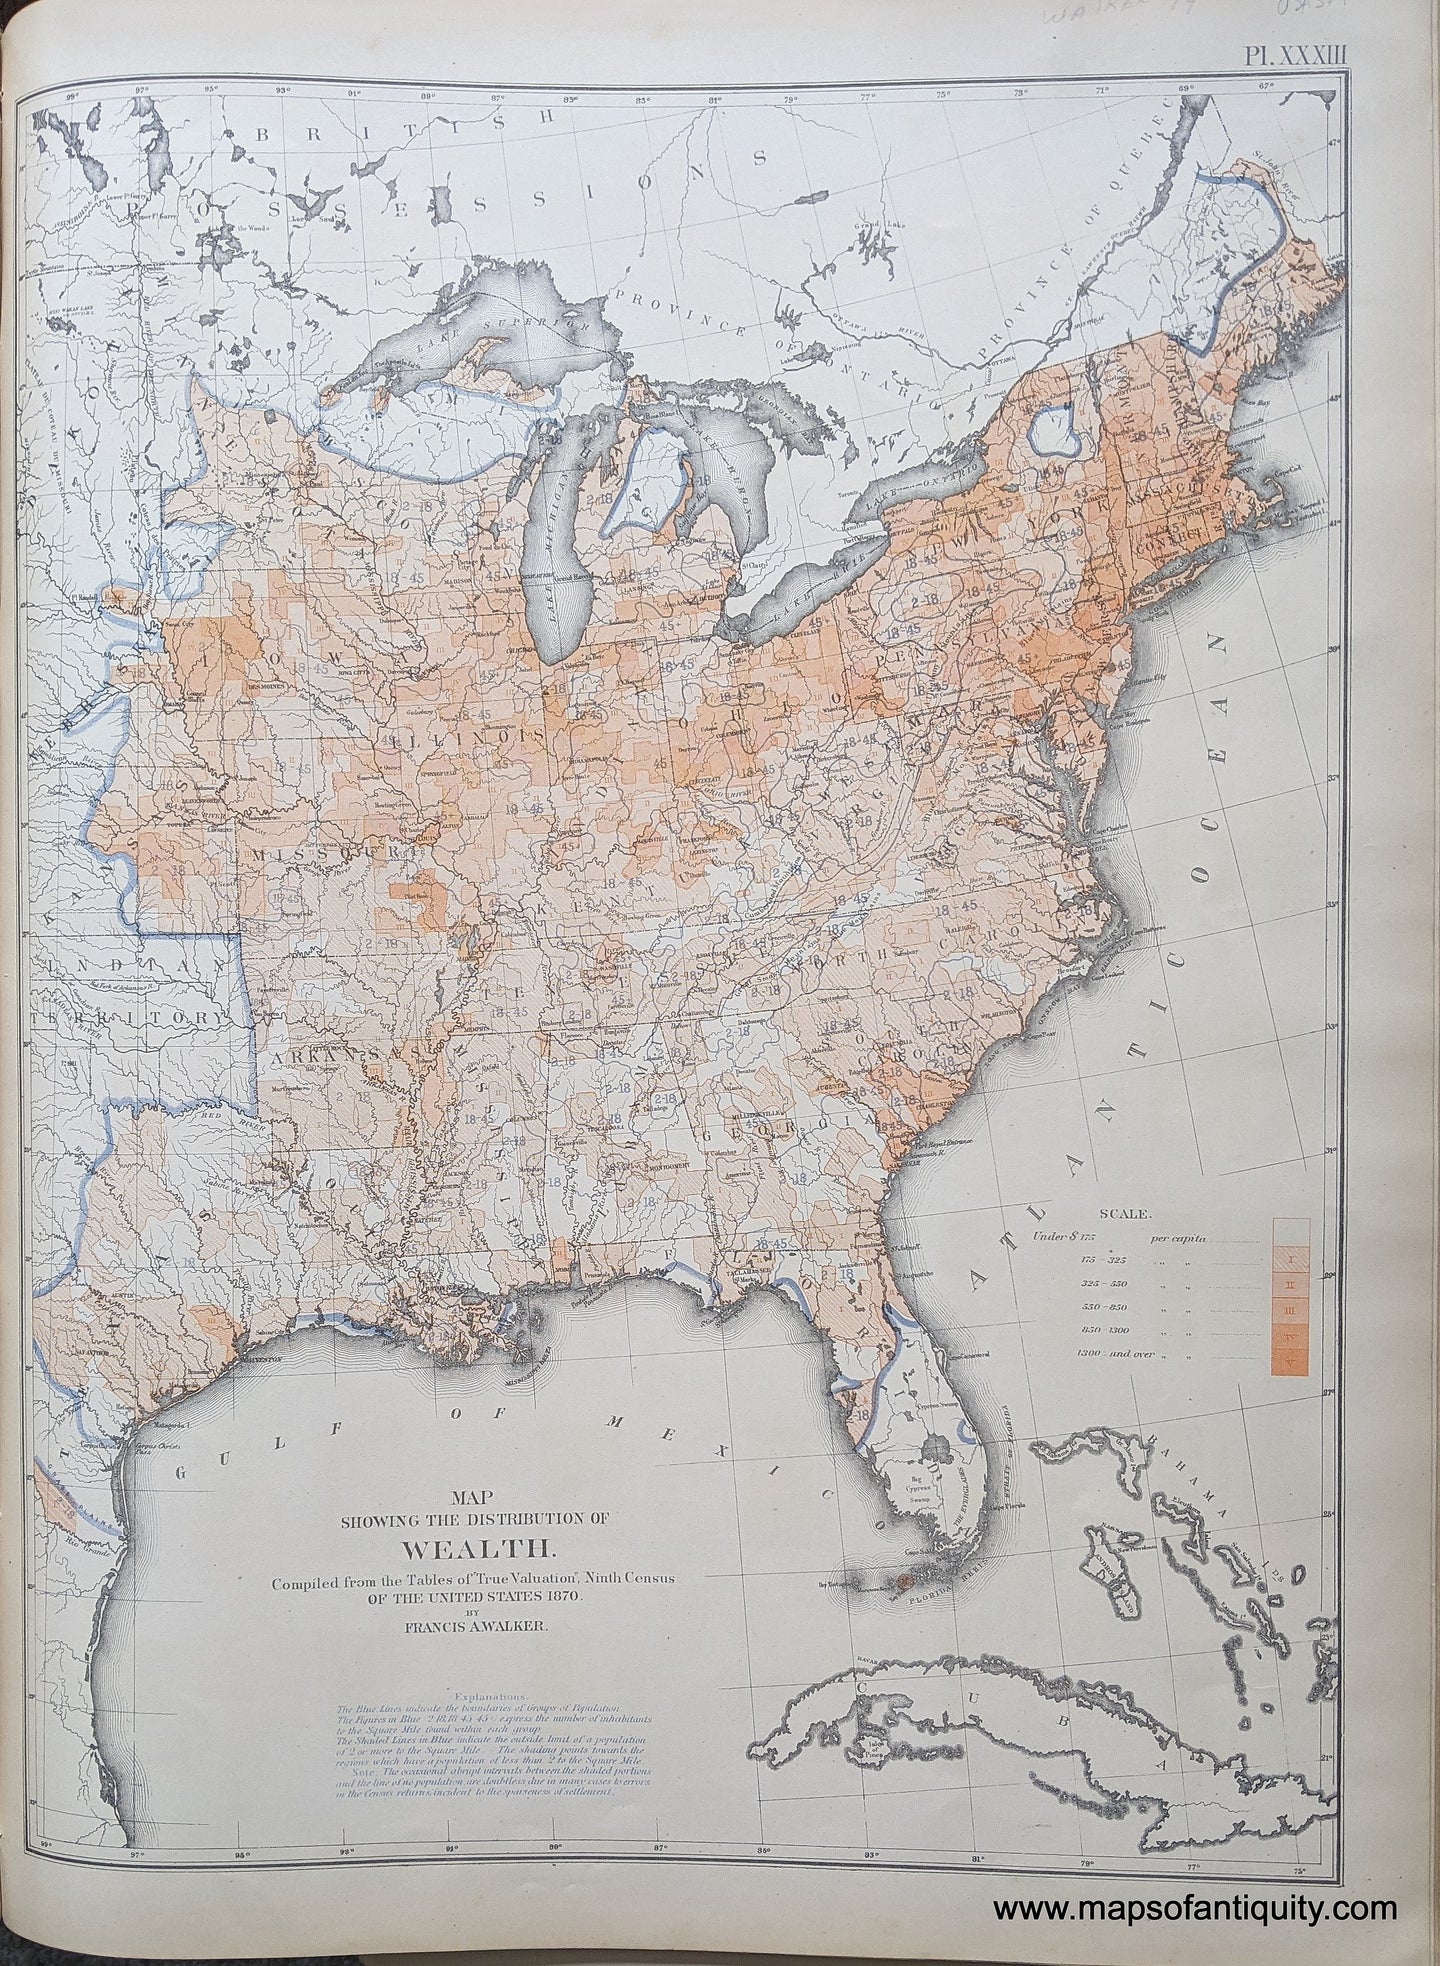 Genuine-Antique-Map-Map-Showing-the-Distribution-of-Wealth.-United-States--1874-Walker-/-Bien-Maps-Of-Antiquity-1800s-19th-century